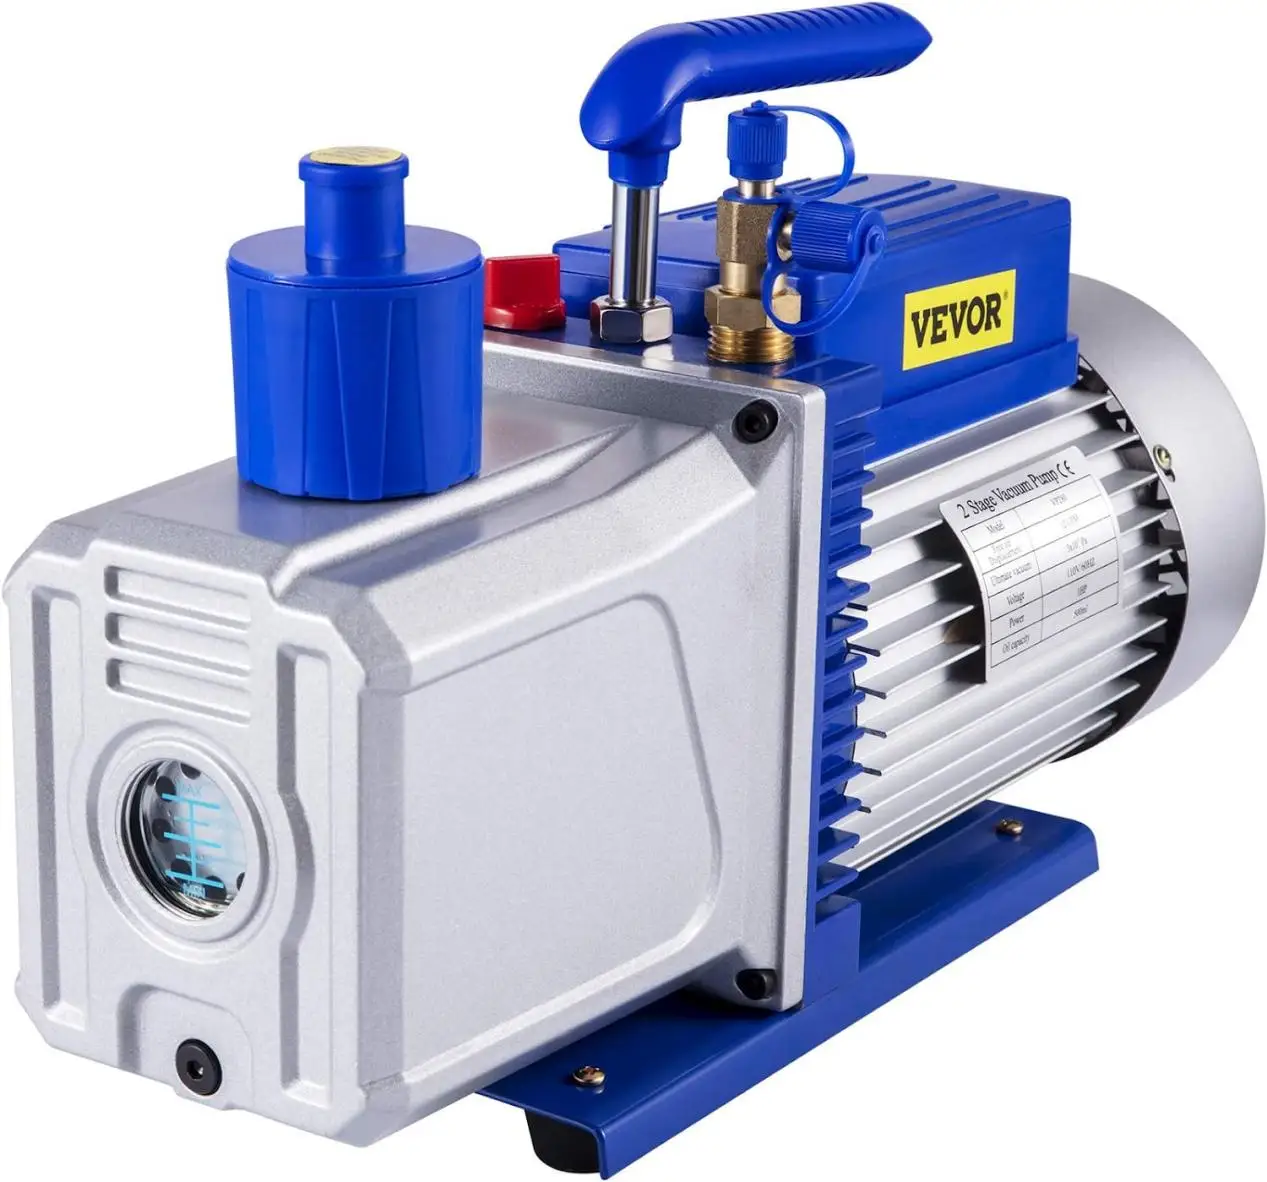 Vacuum Pump 2  stage Voltage 220v 240v/50hz Power 370W Free Air Displacement 2L/ Min Ultimate Pressure 0.3 Pa Oil  Capacity (ml)